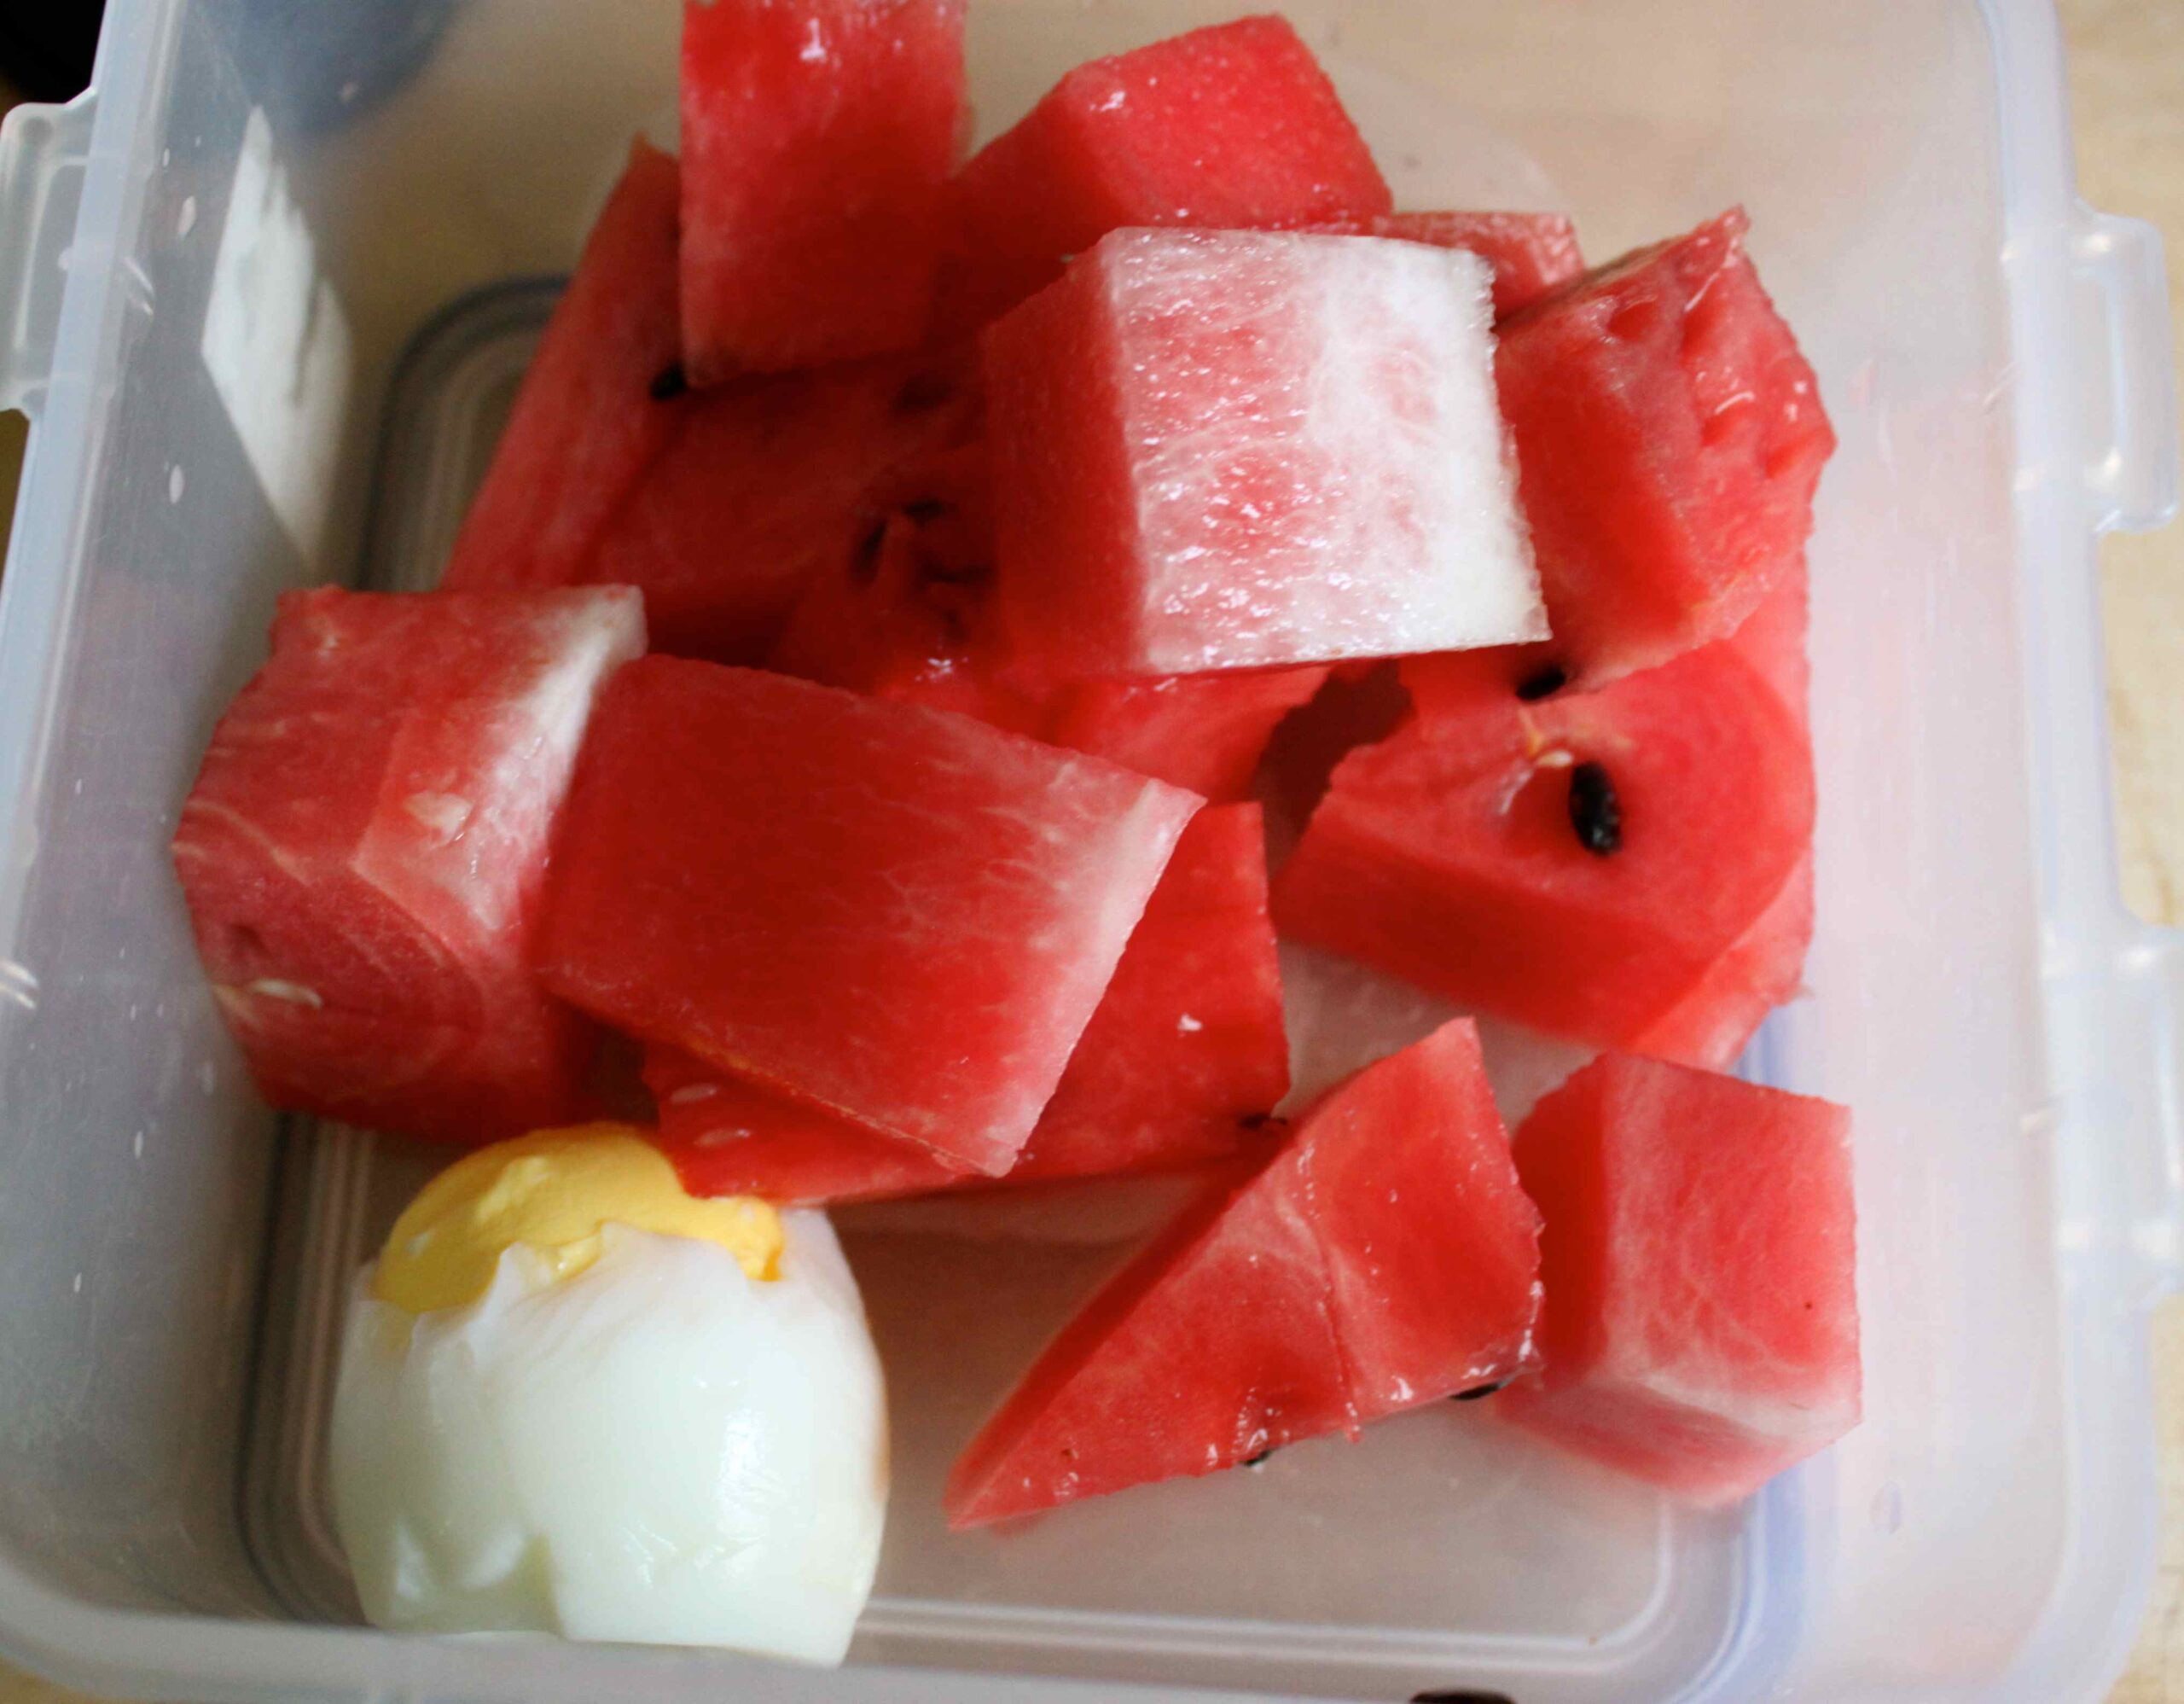 watermelon and egg diet